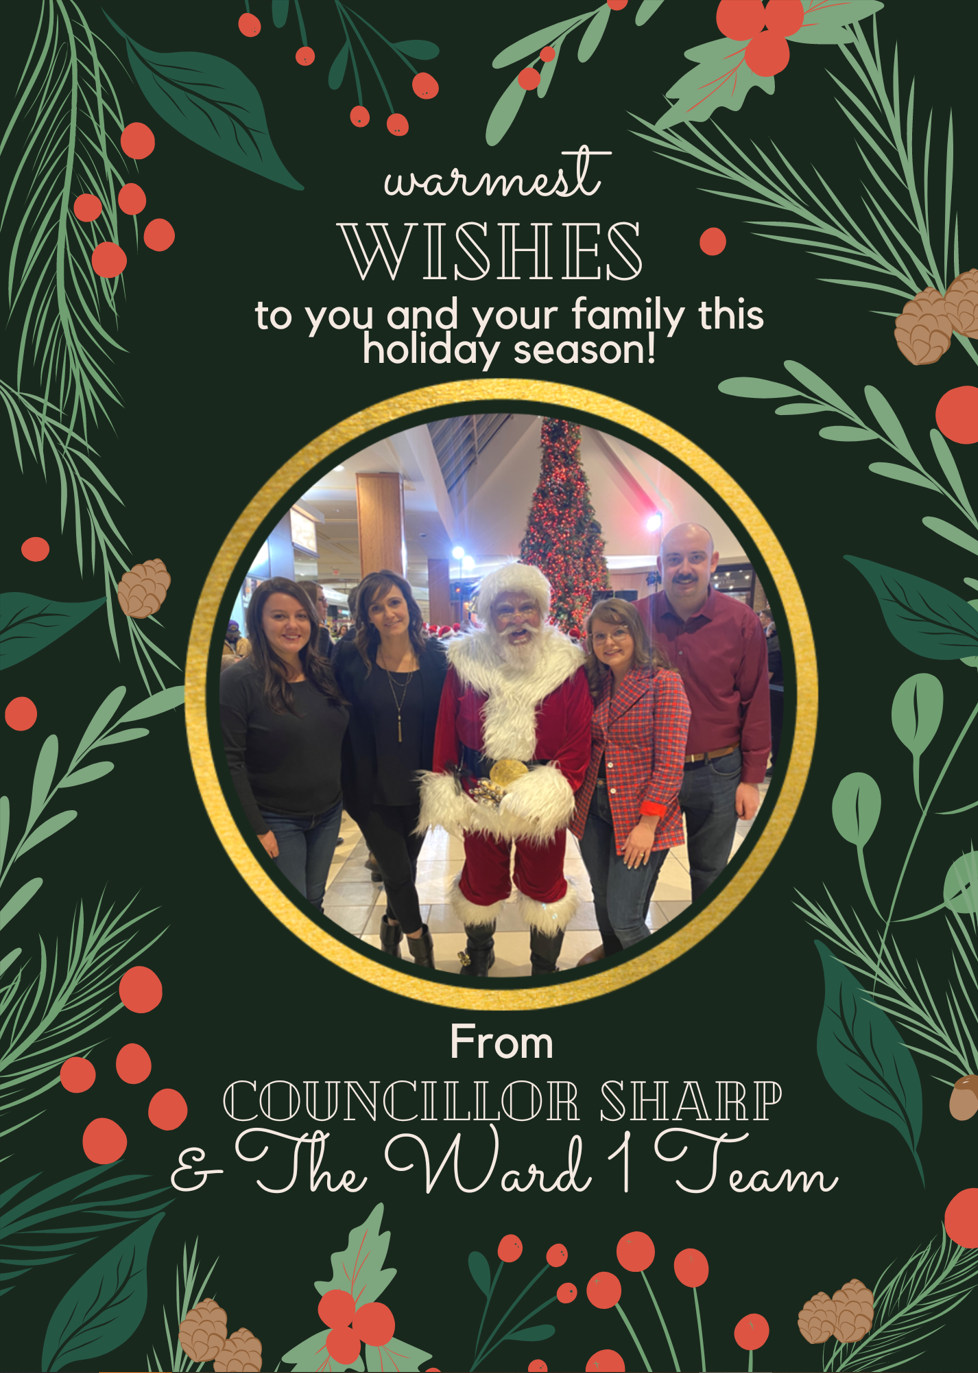 Warmest wishes to you and your family this holiday season! From Councillor Sharp and the Ward 1 team